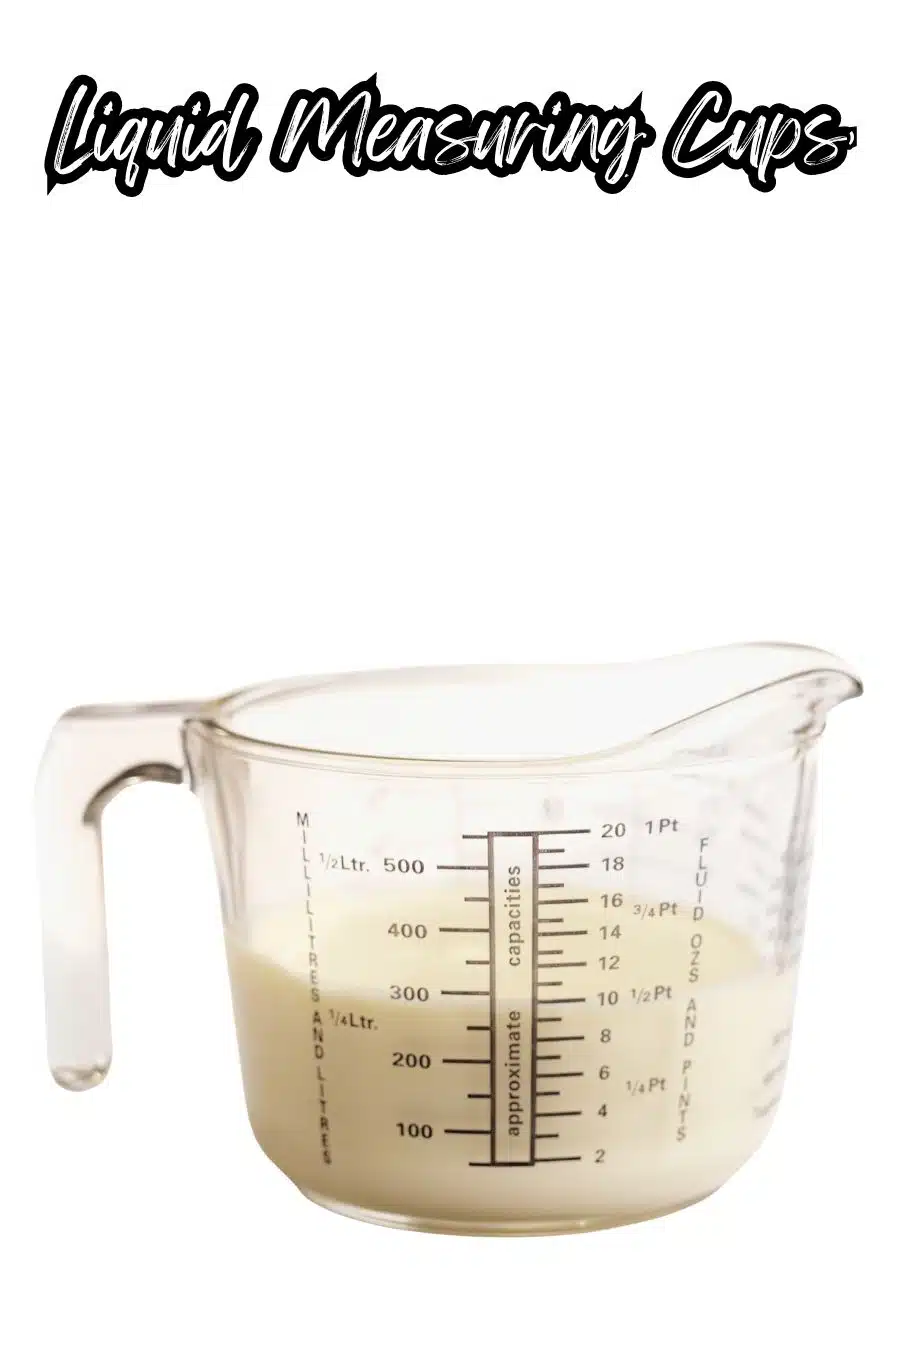 How Many Ounces Are In A Cup